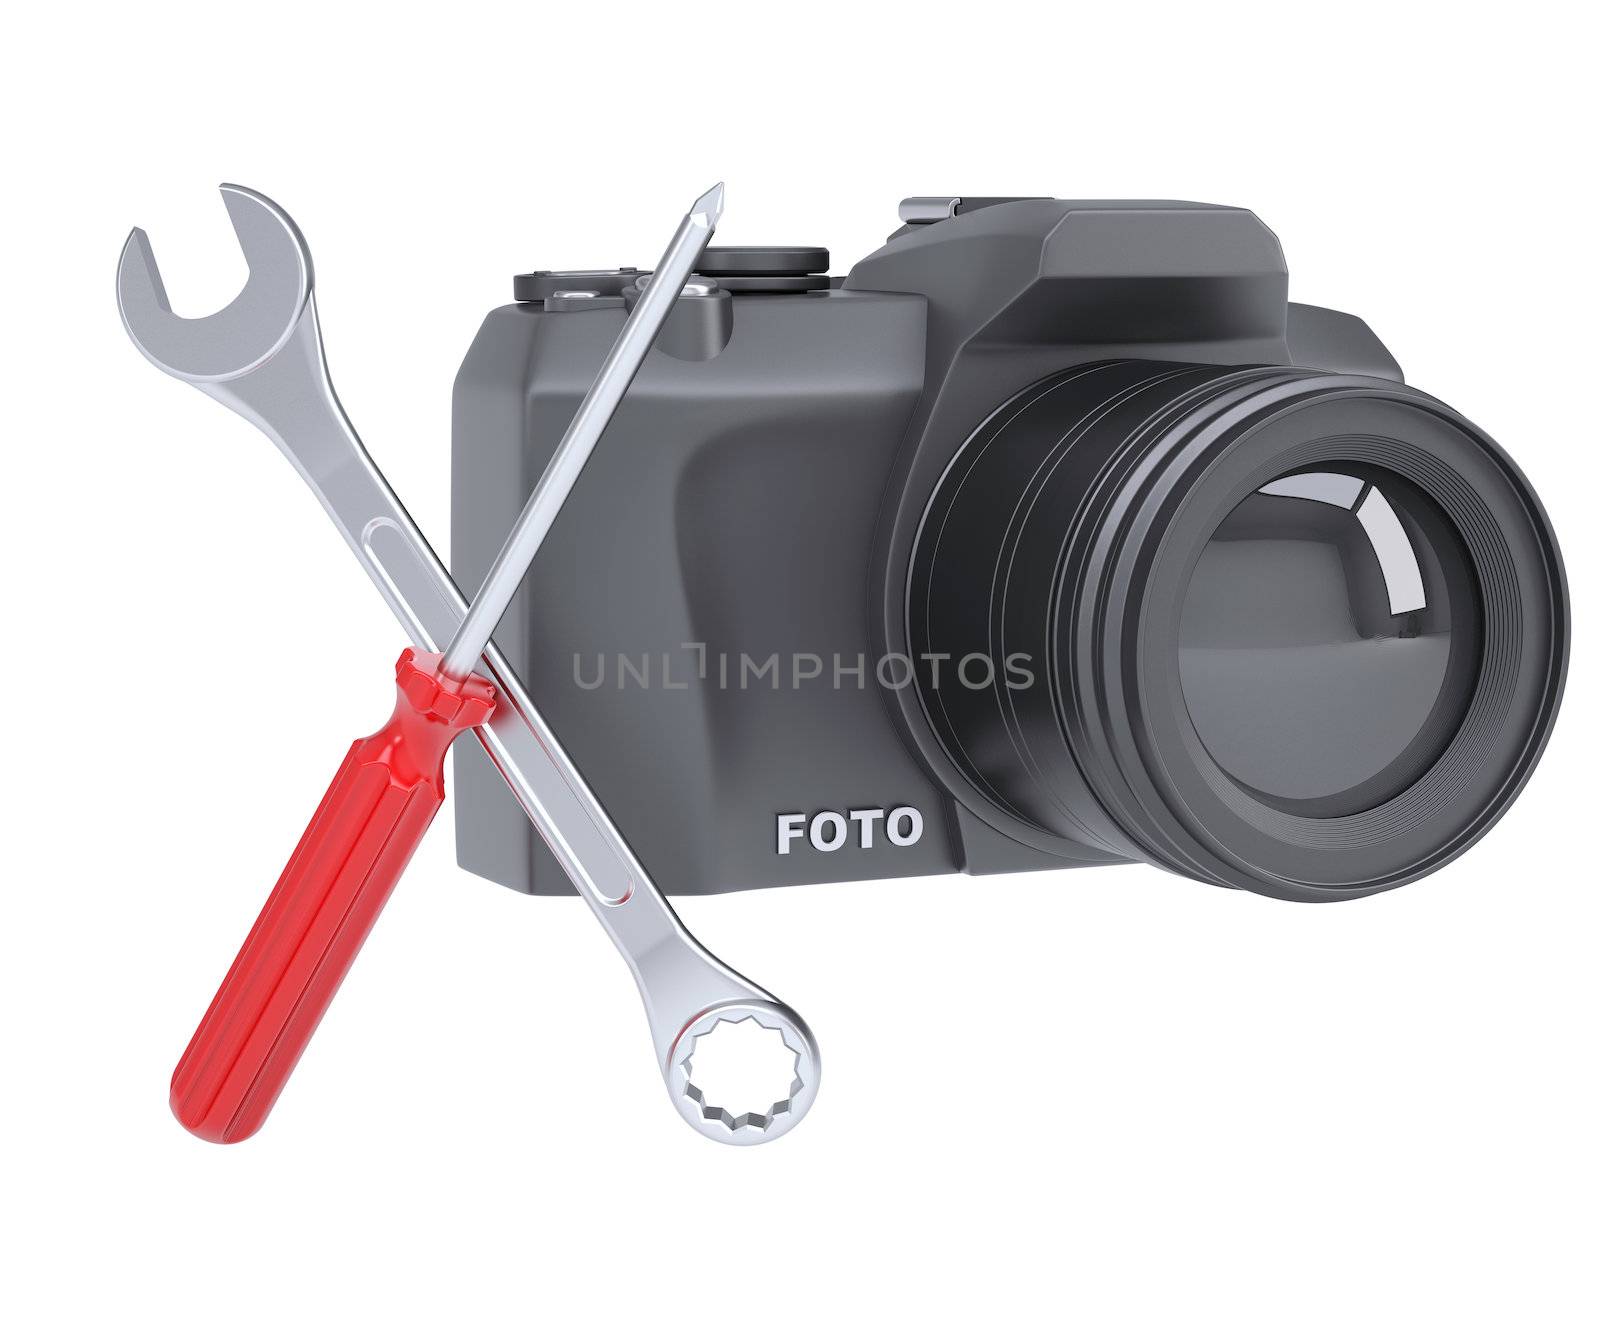 SLR camera, a screwdriver and a wrench. 3d render isolated on white background